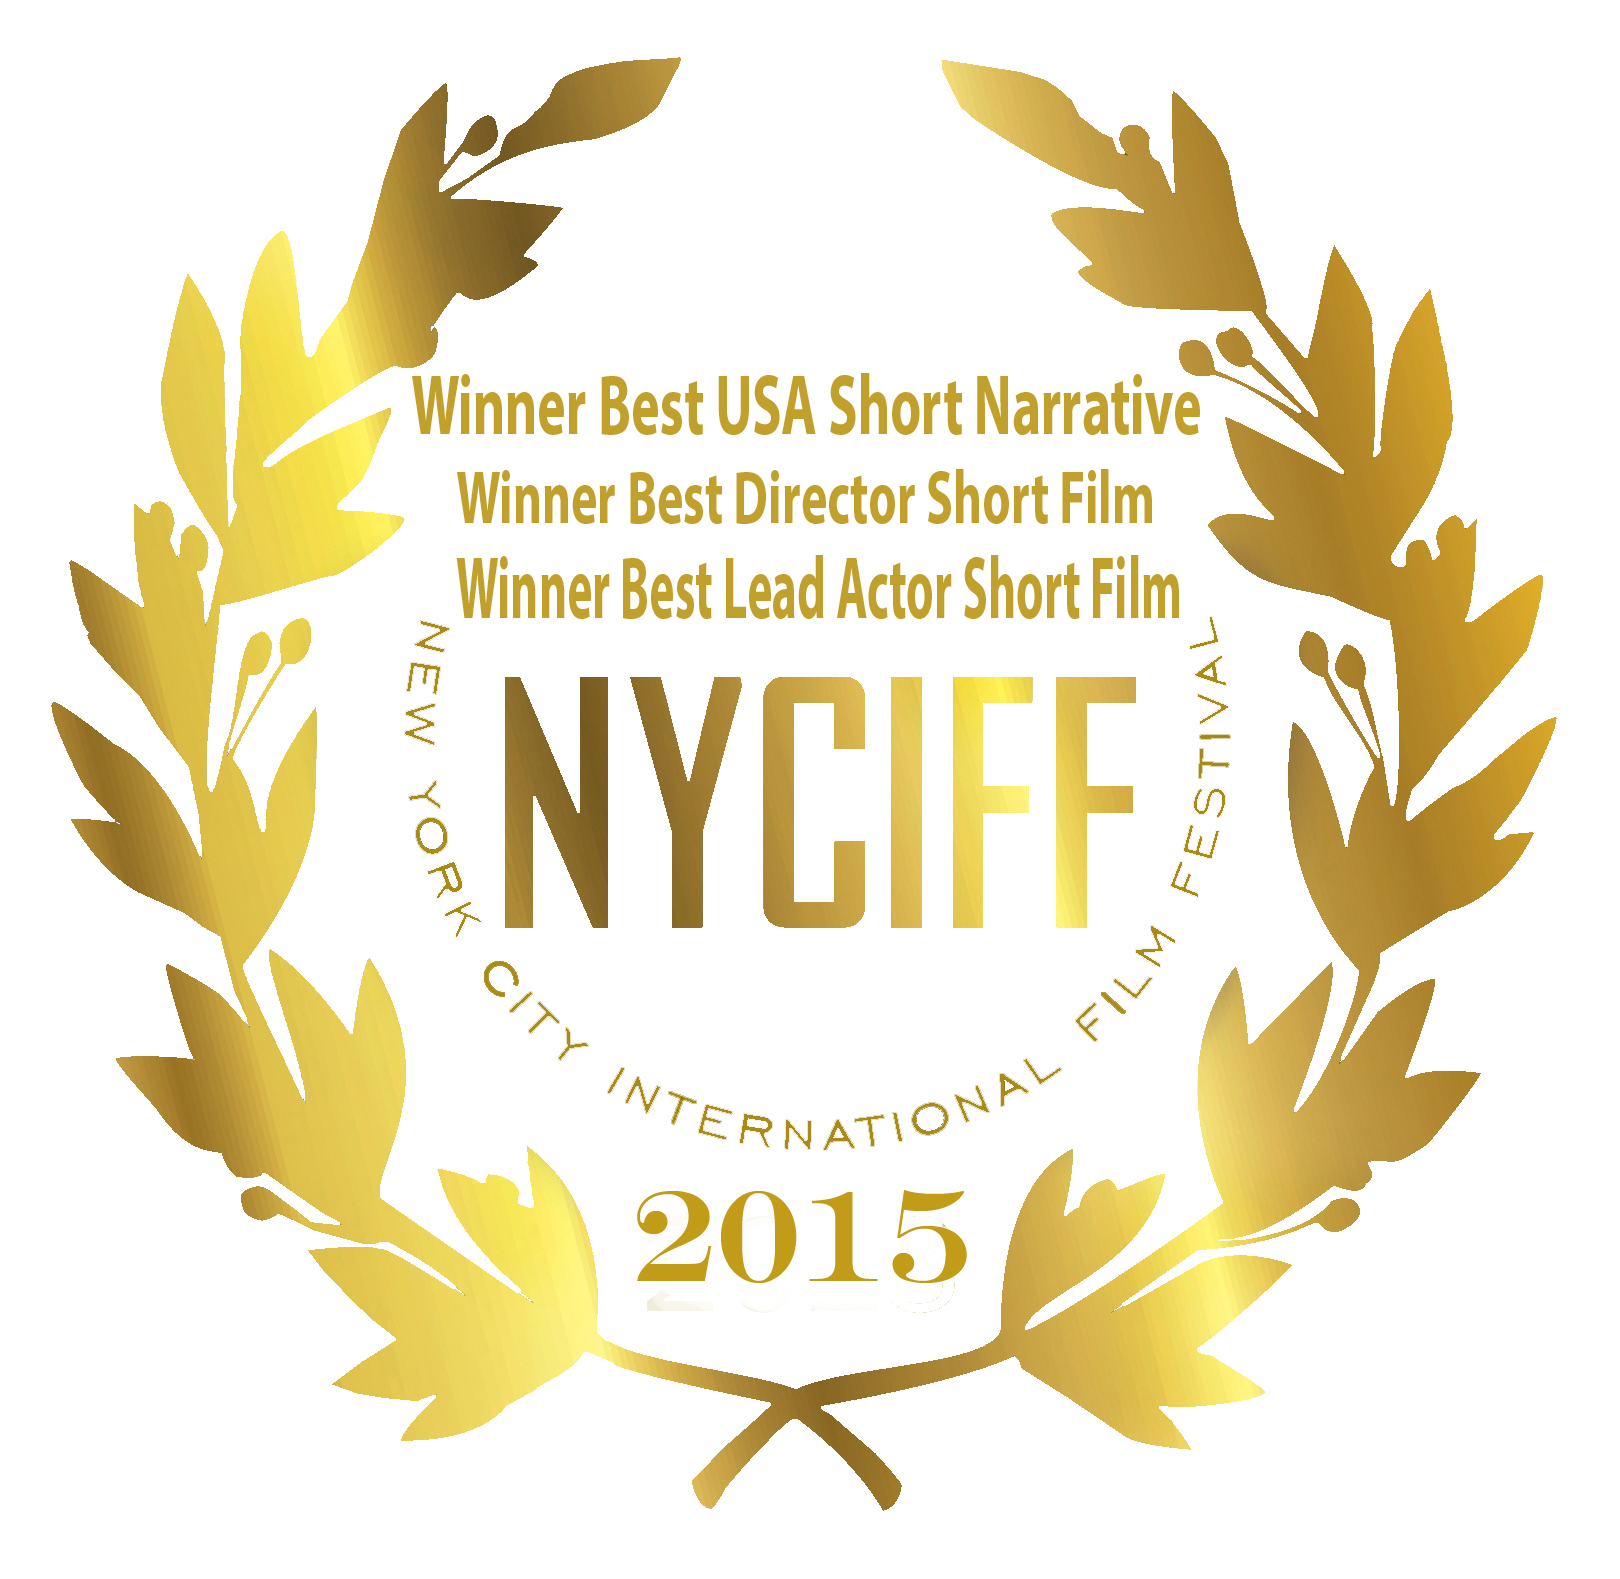 George Pogatsia was the recipient of the Best Lead Actor In a Short Film and Best Director In a Short Film awards at the 2015 NYCIFF. 